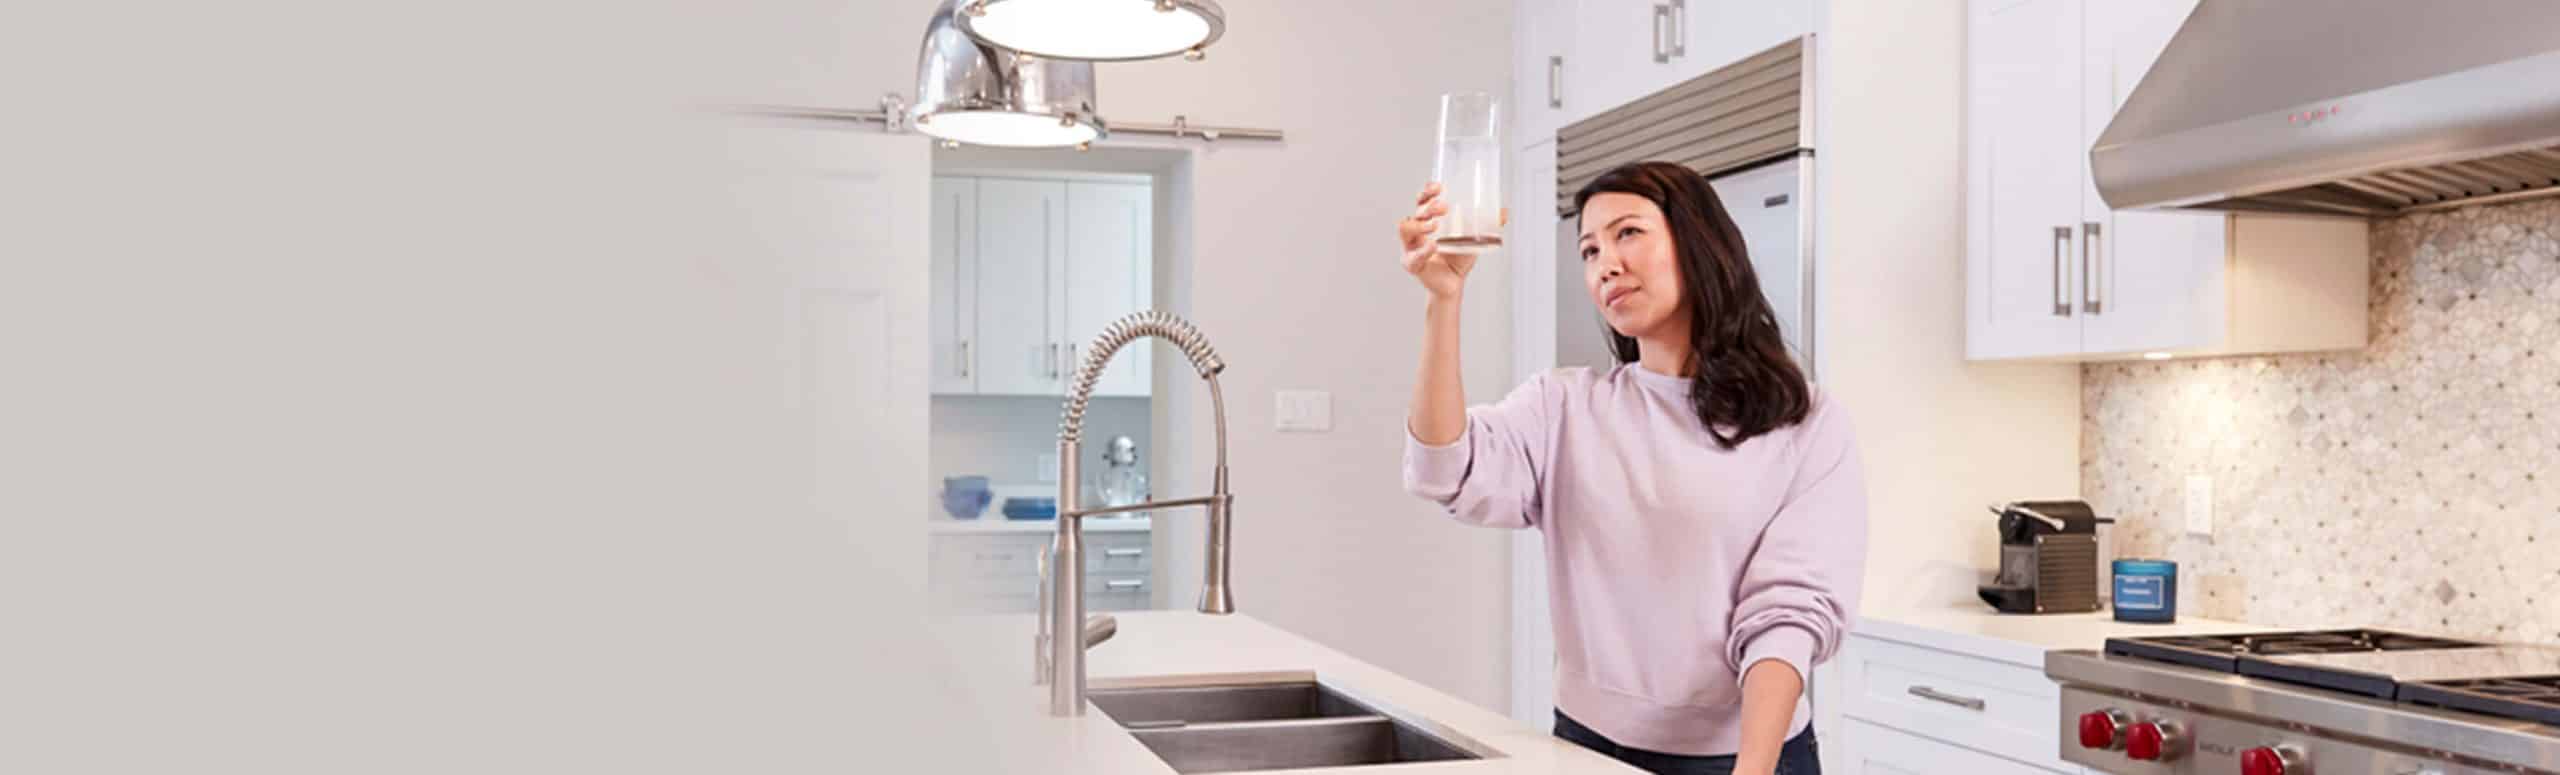 Woman in a kitchen holding up a glass of water and analysing it